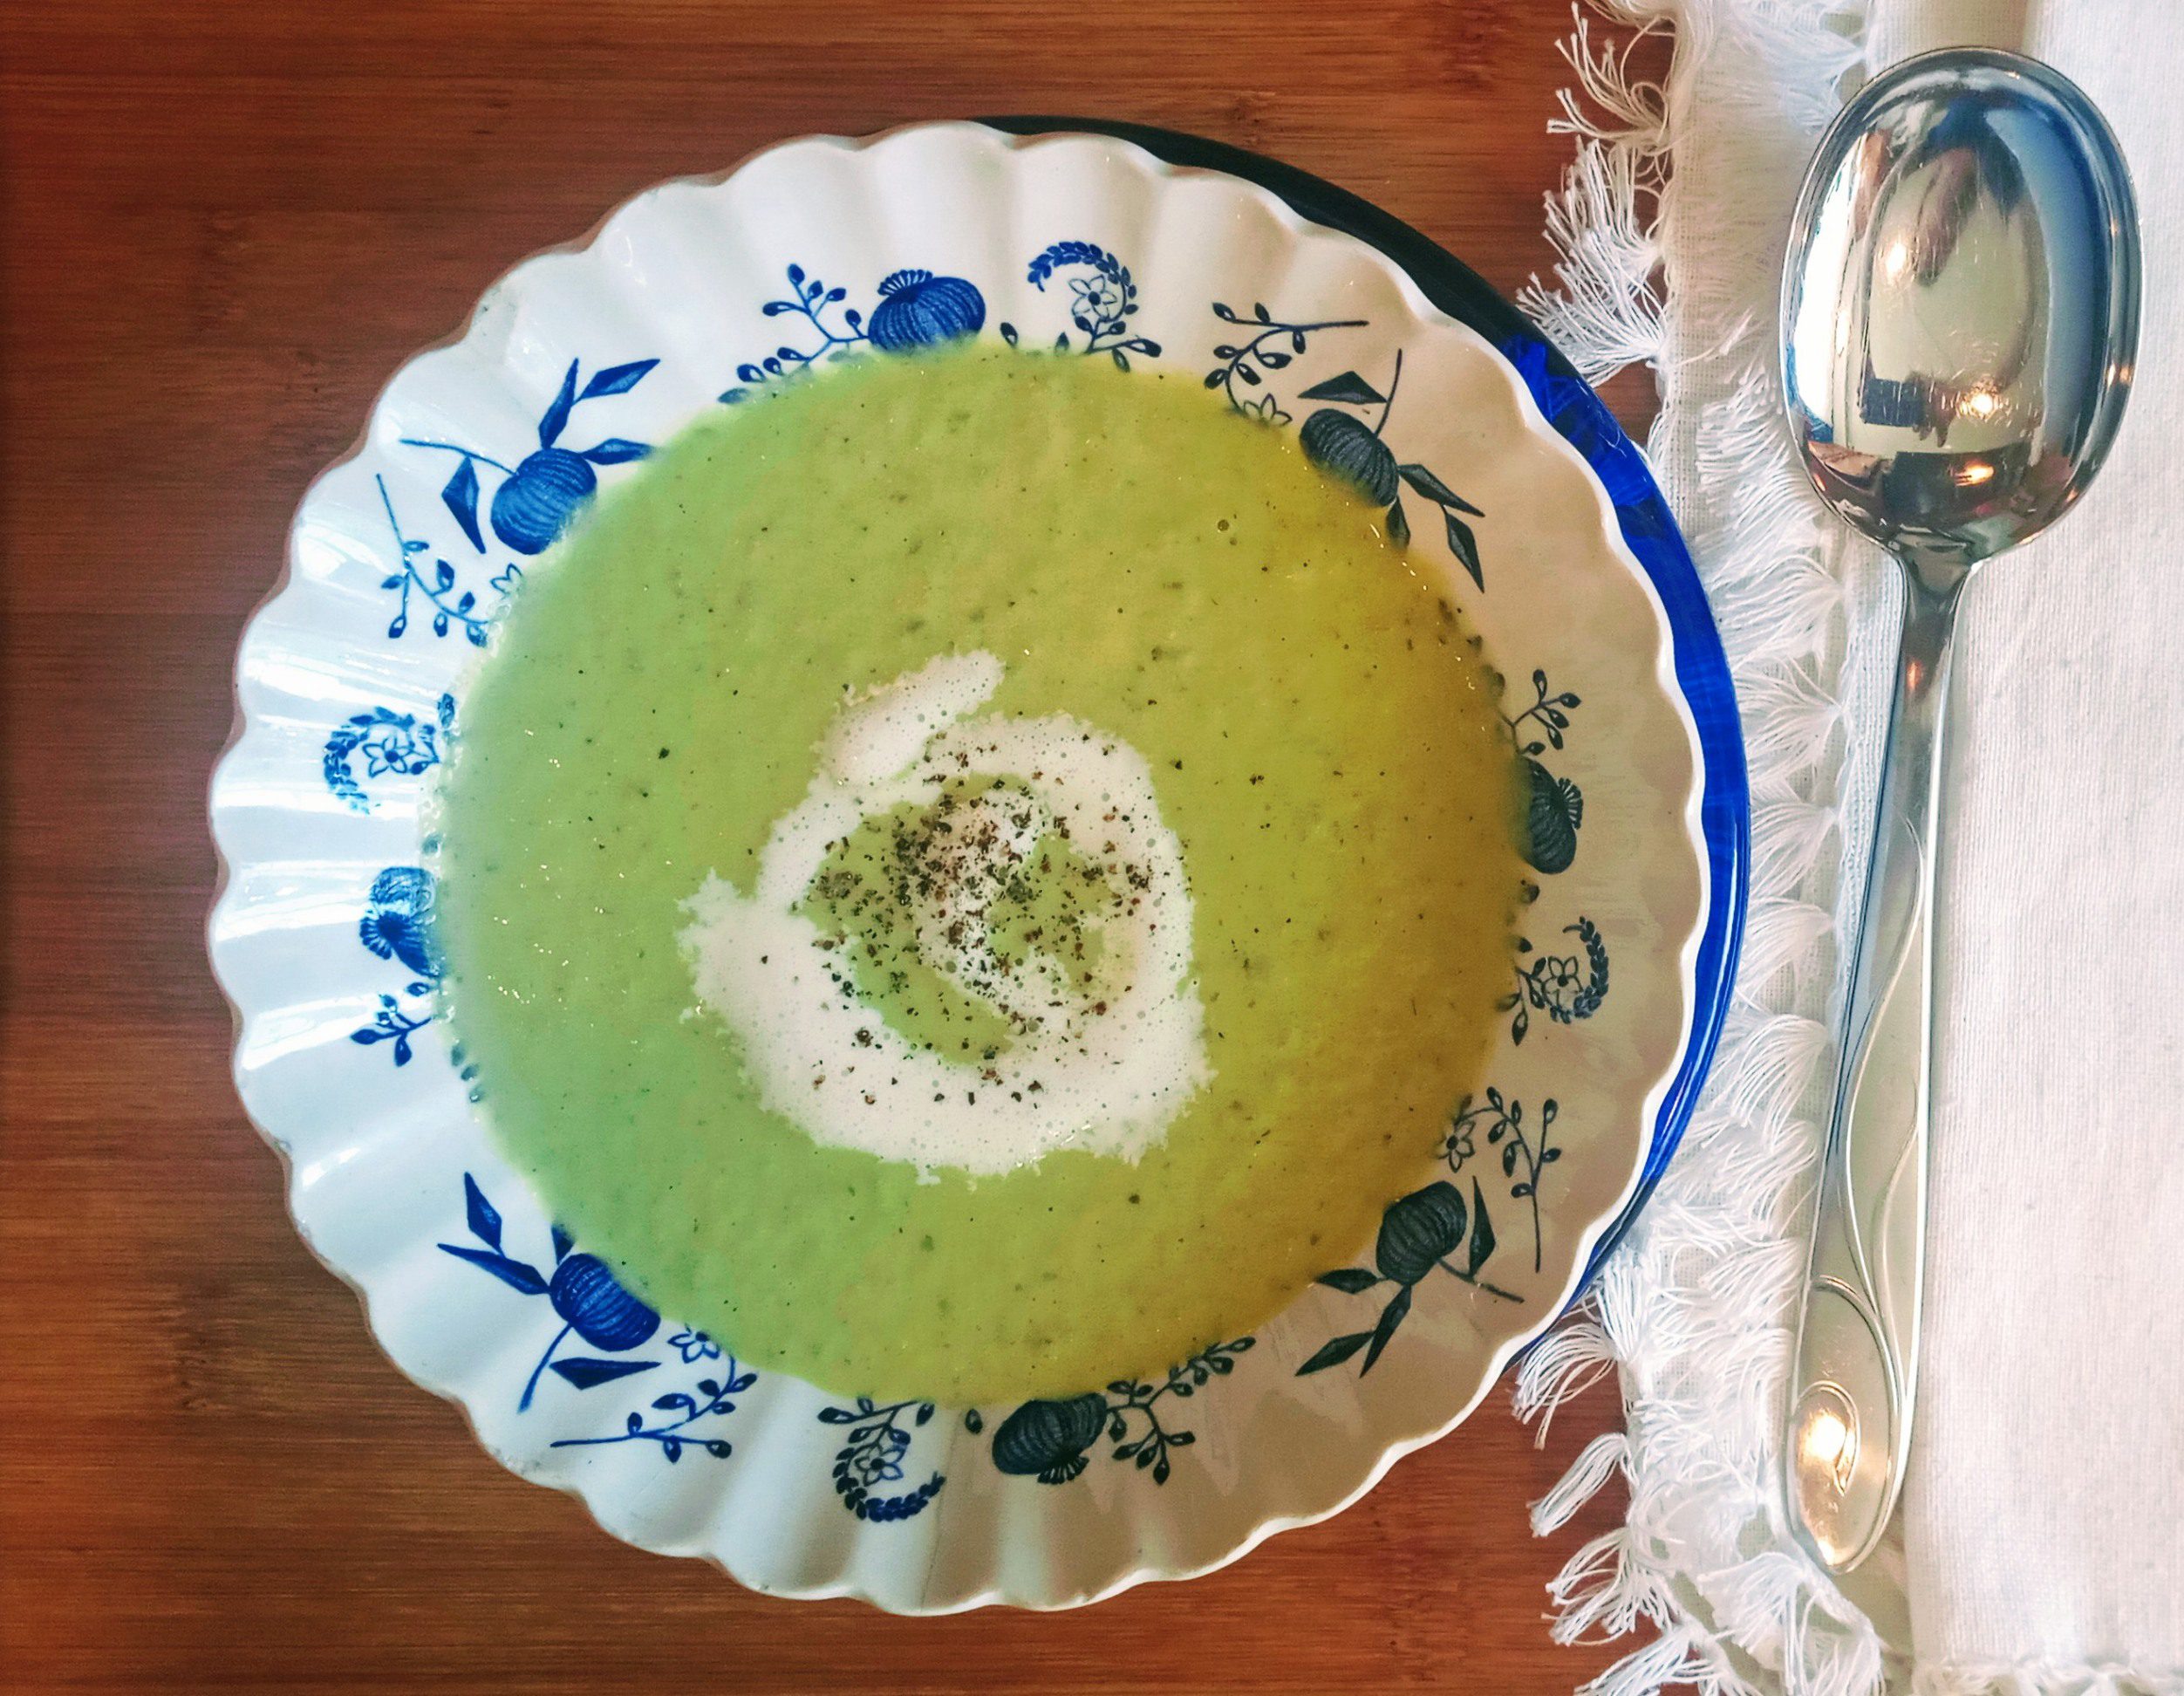 Chilled cream of cucumber soup is a childhood memory